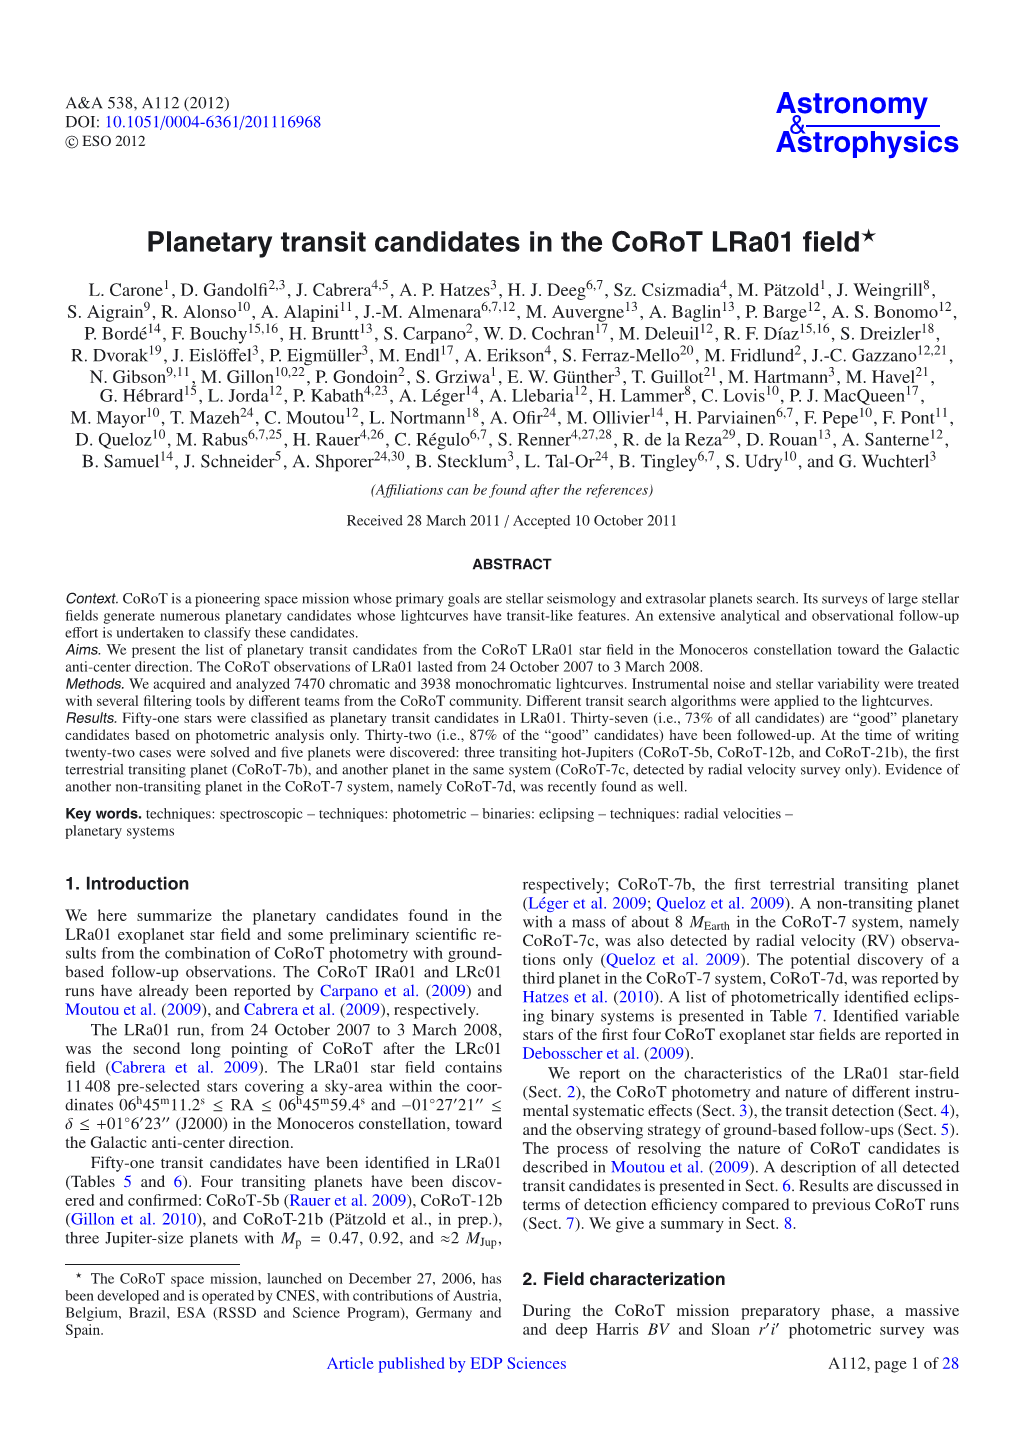 Planetary Transit Candidates in the Corot Lra01 Field⋆